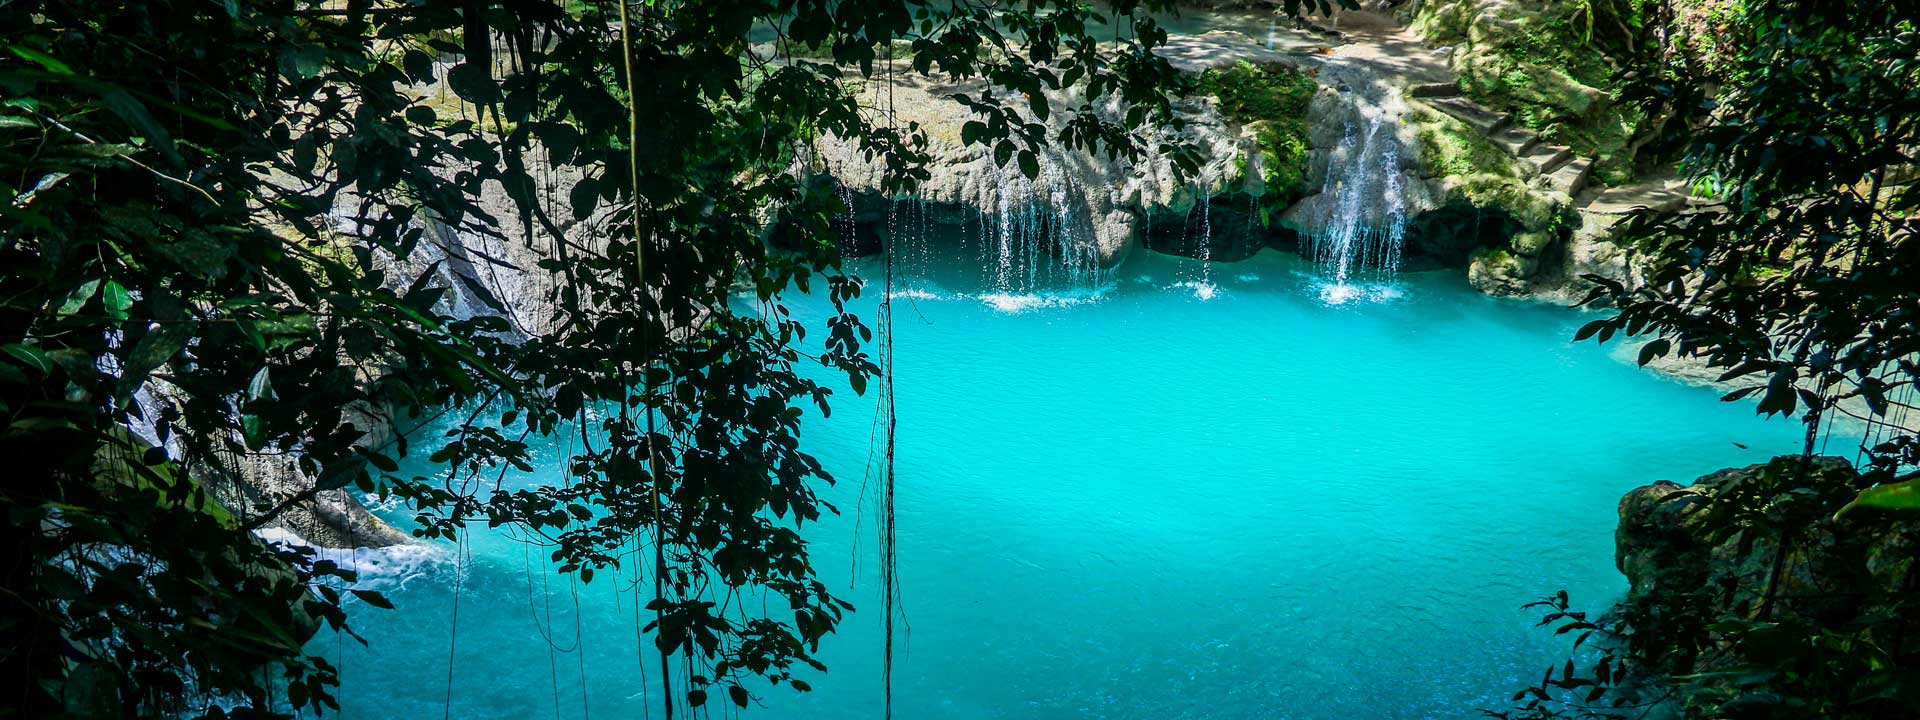 Blue Hole Mineral Spring